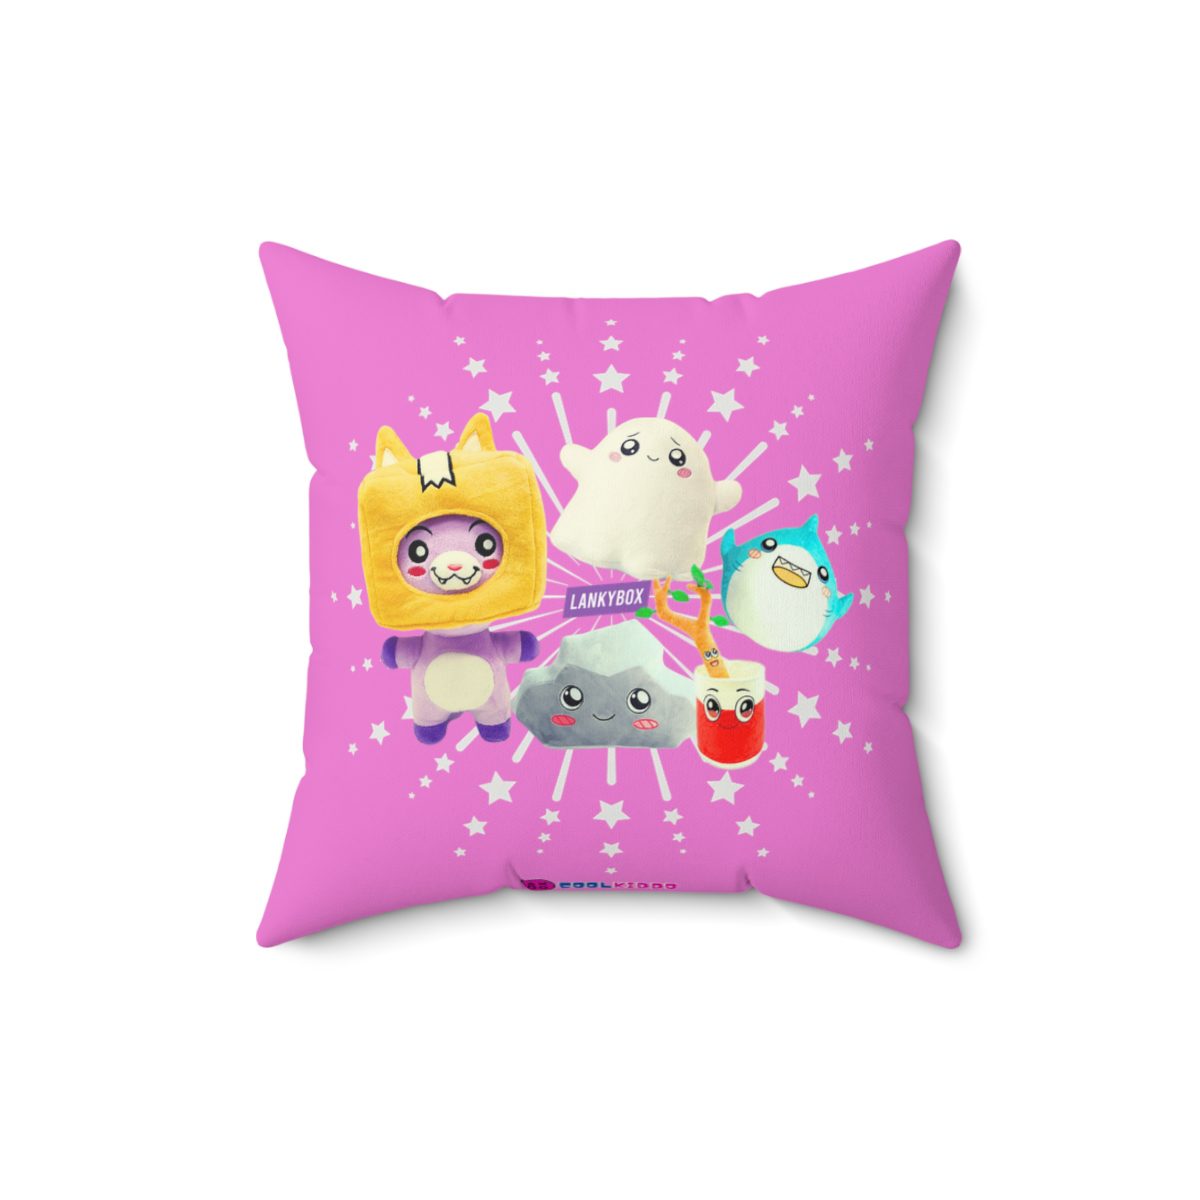 Lankybox Cute Characters Pink Cushion: Double-Sided Print Cool Kiddo 12